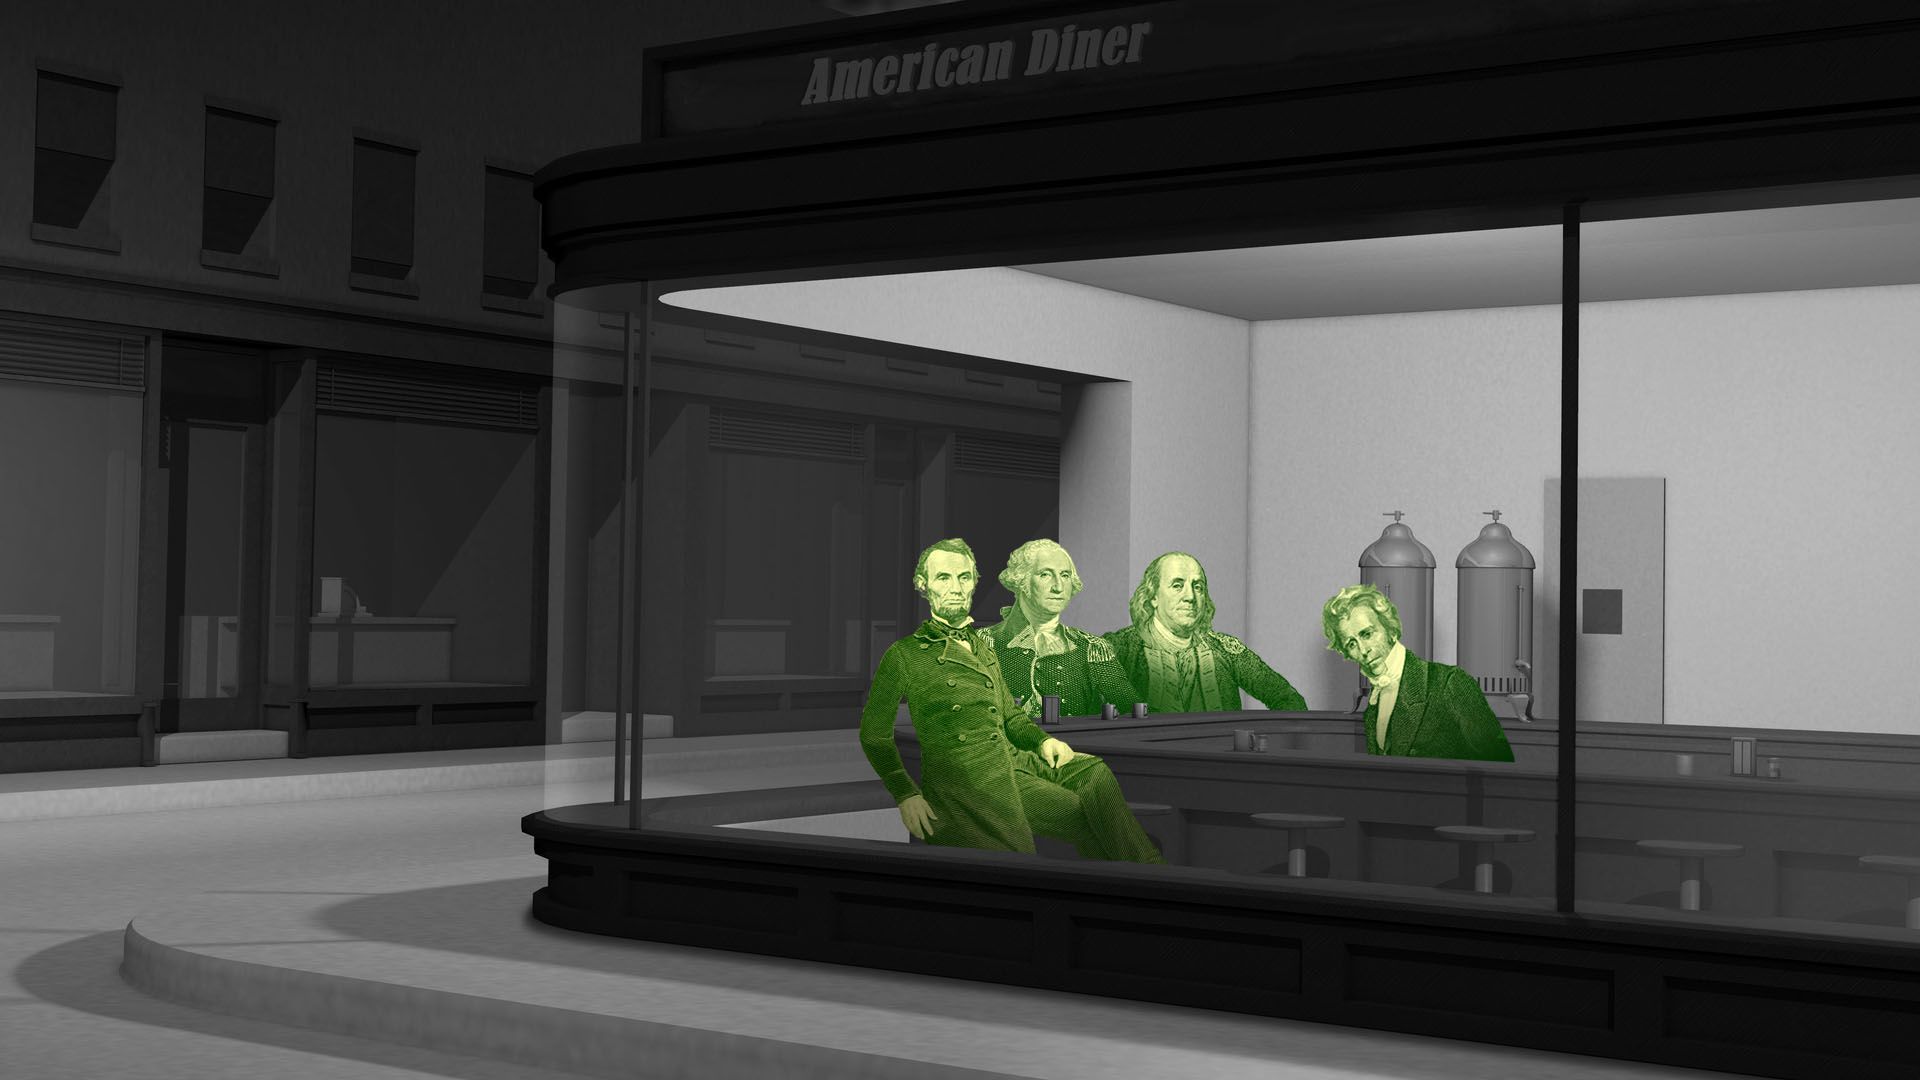 In this illustration, the founding fathers sit in a room